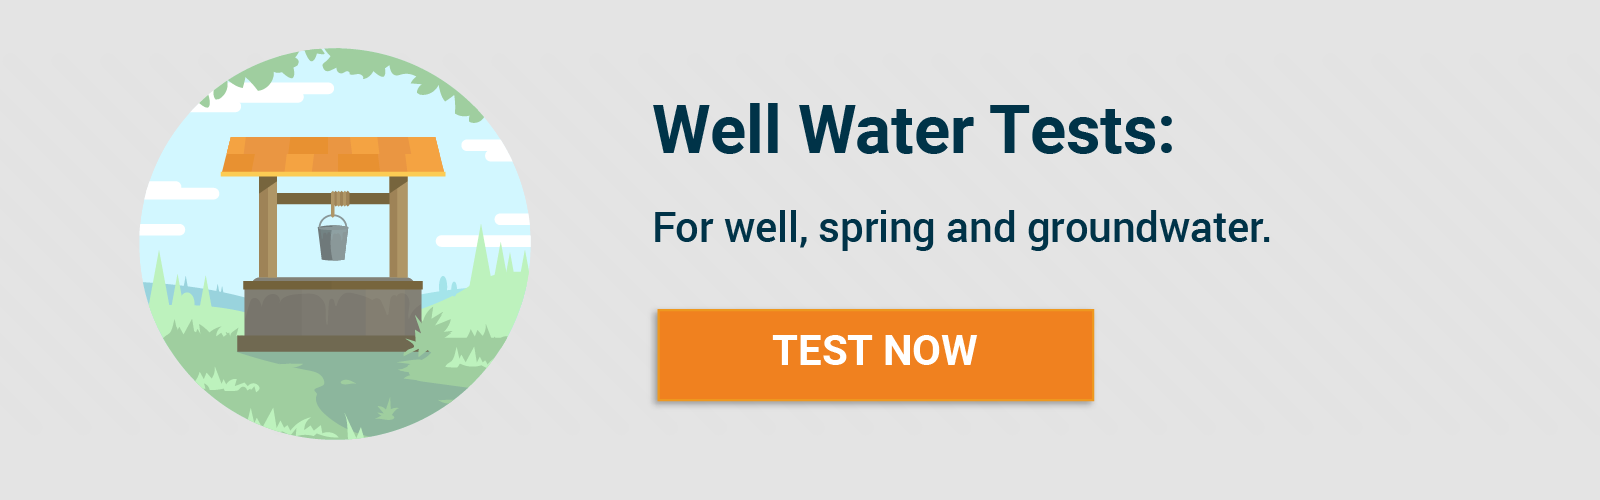 Well Water Tests